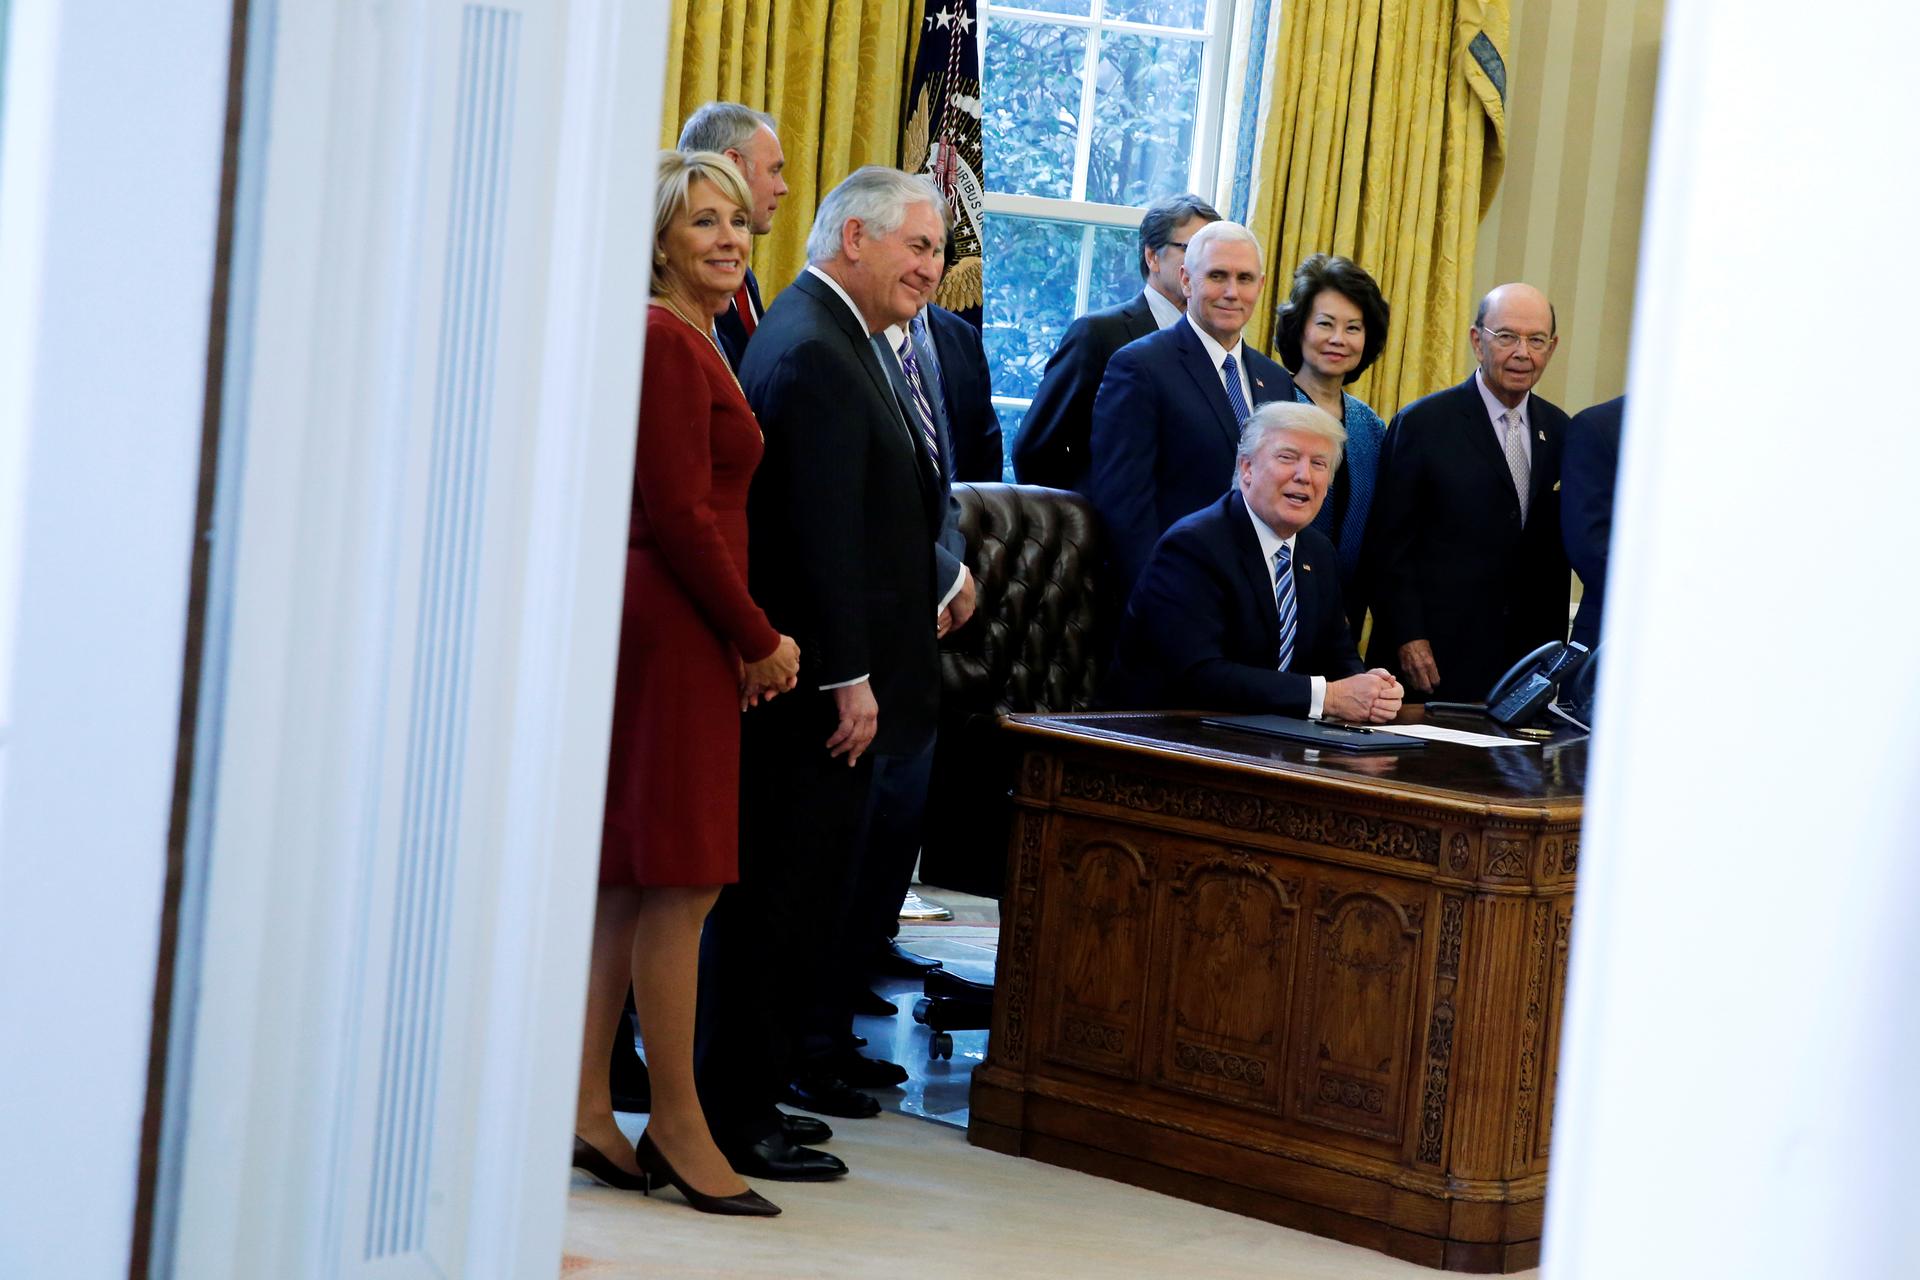 donald trump as seen through the double doors of the oval office surrounded by his advisers